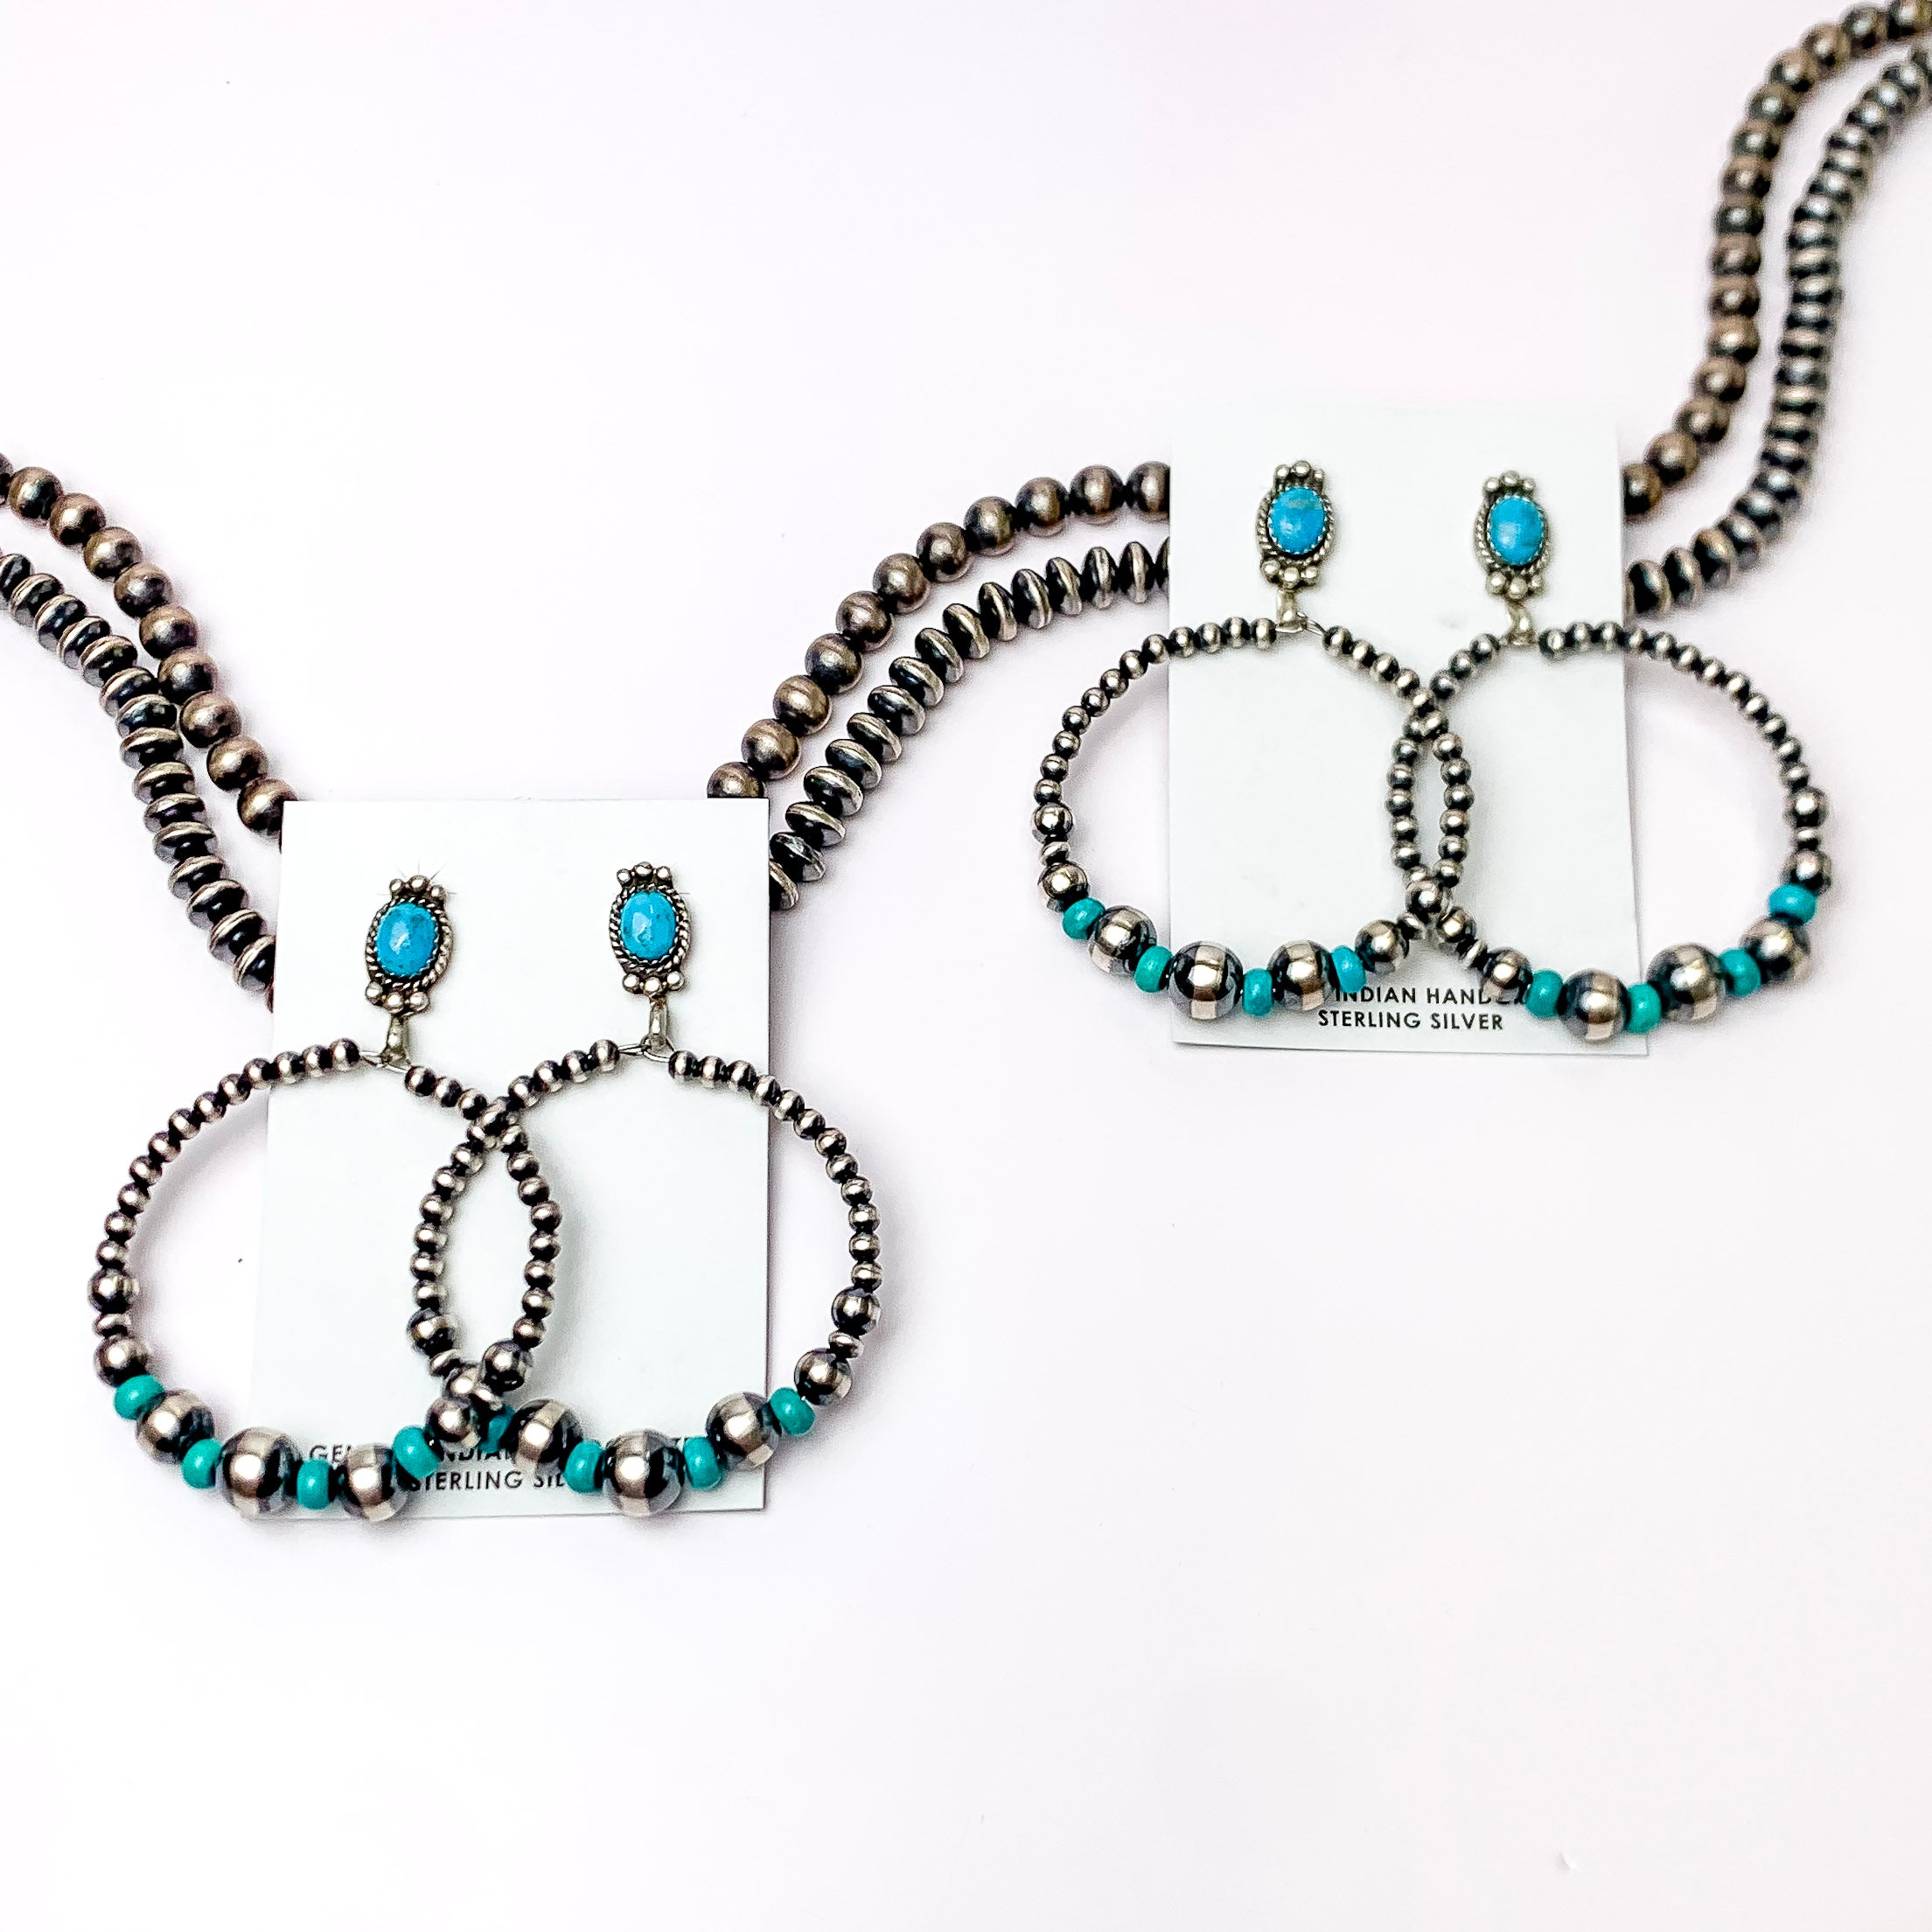 In the picture are Navajo hoop earrings with turquoise pearl studs on top. 